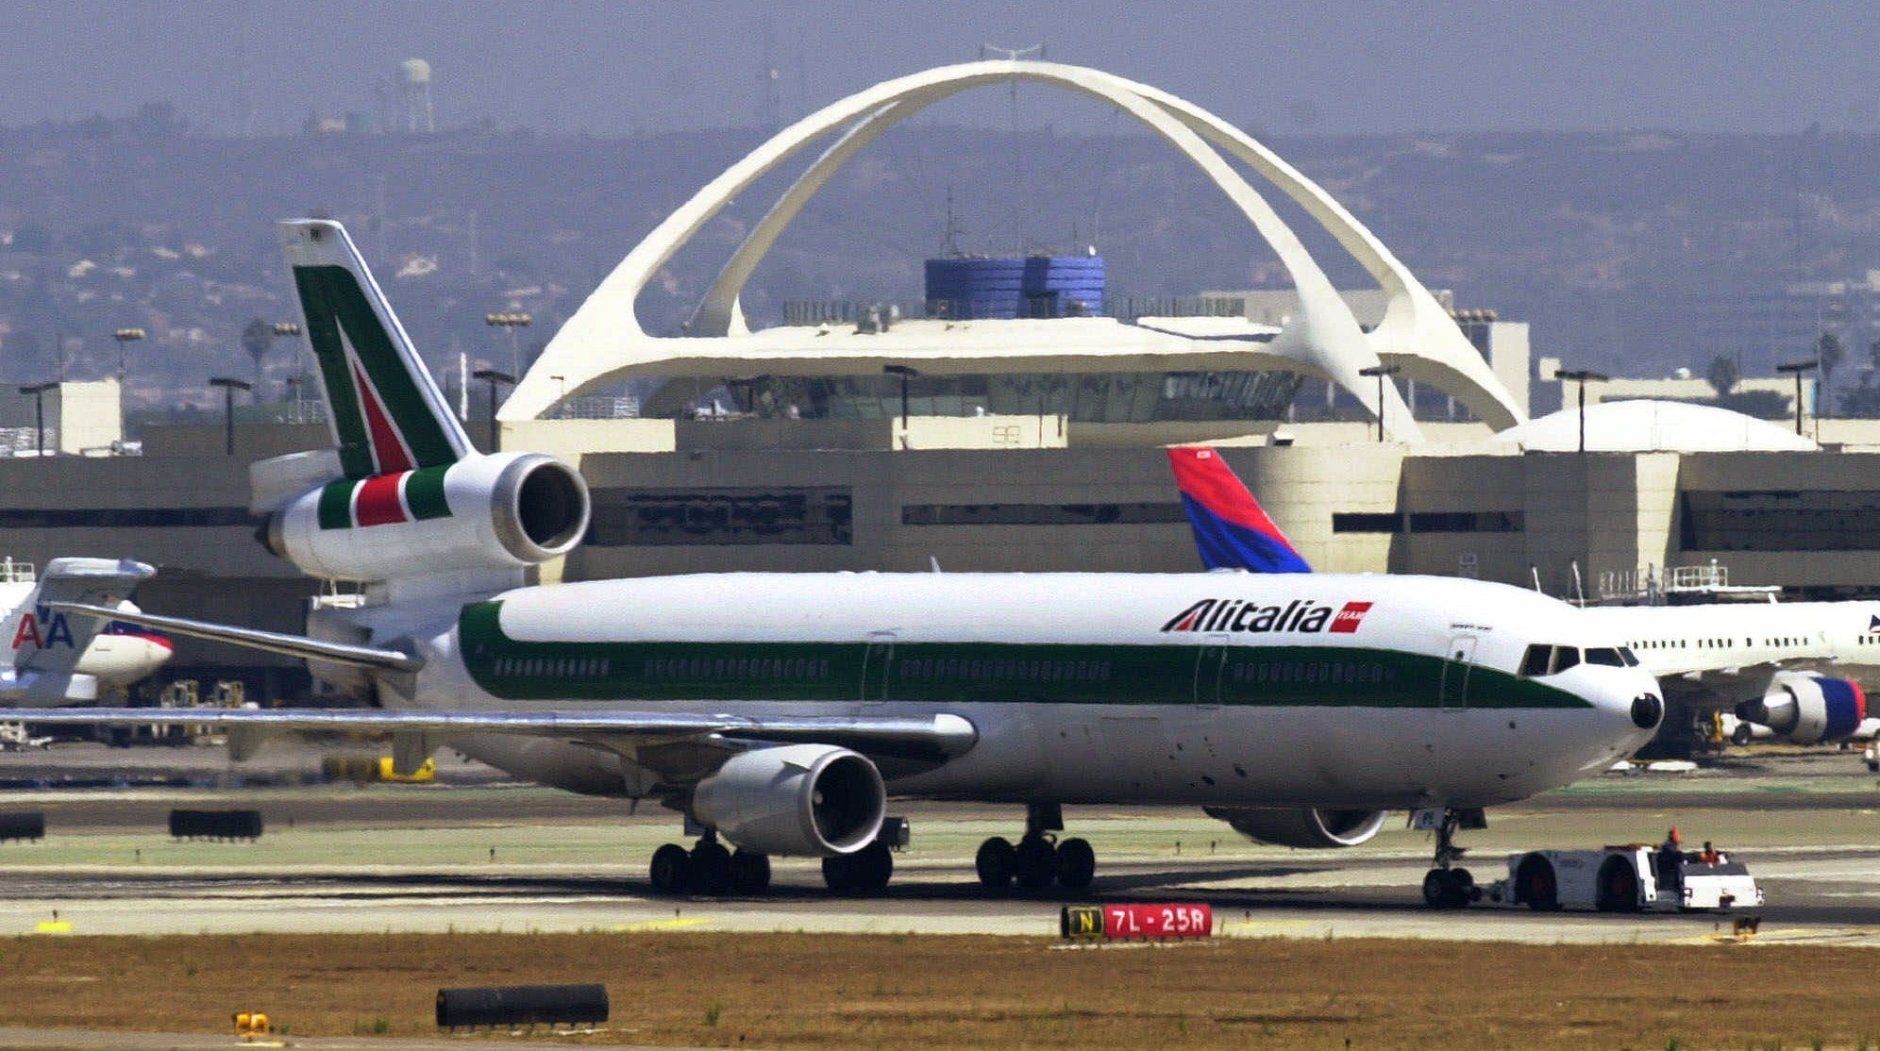 An Alitalia MD-11 jetliner, the first plane to land at Los Angeles International Airport after air operations resumed Thursday, Sept. 13, 2001, is towed past the airport theme building after unloading passengers at a terminal.  All U.S. air travel was shut down Tuesday after terrorist attacks in New York and Washington.  LAX was the destination airport of three of the four flights that were lost in the terrorist attacks.  (AP Photo/Reed Saxon)